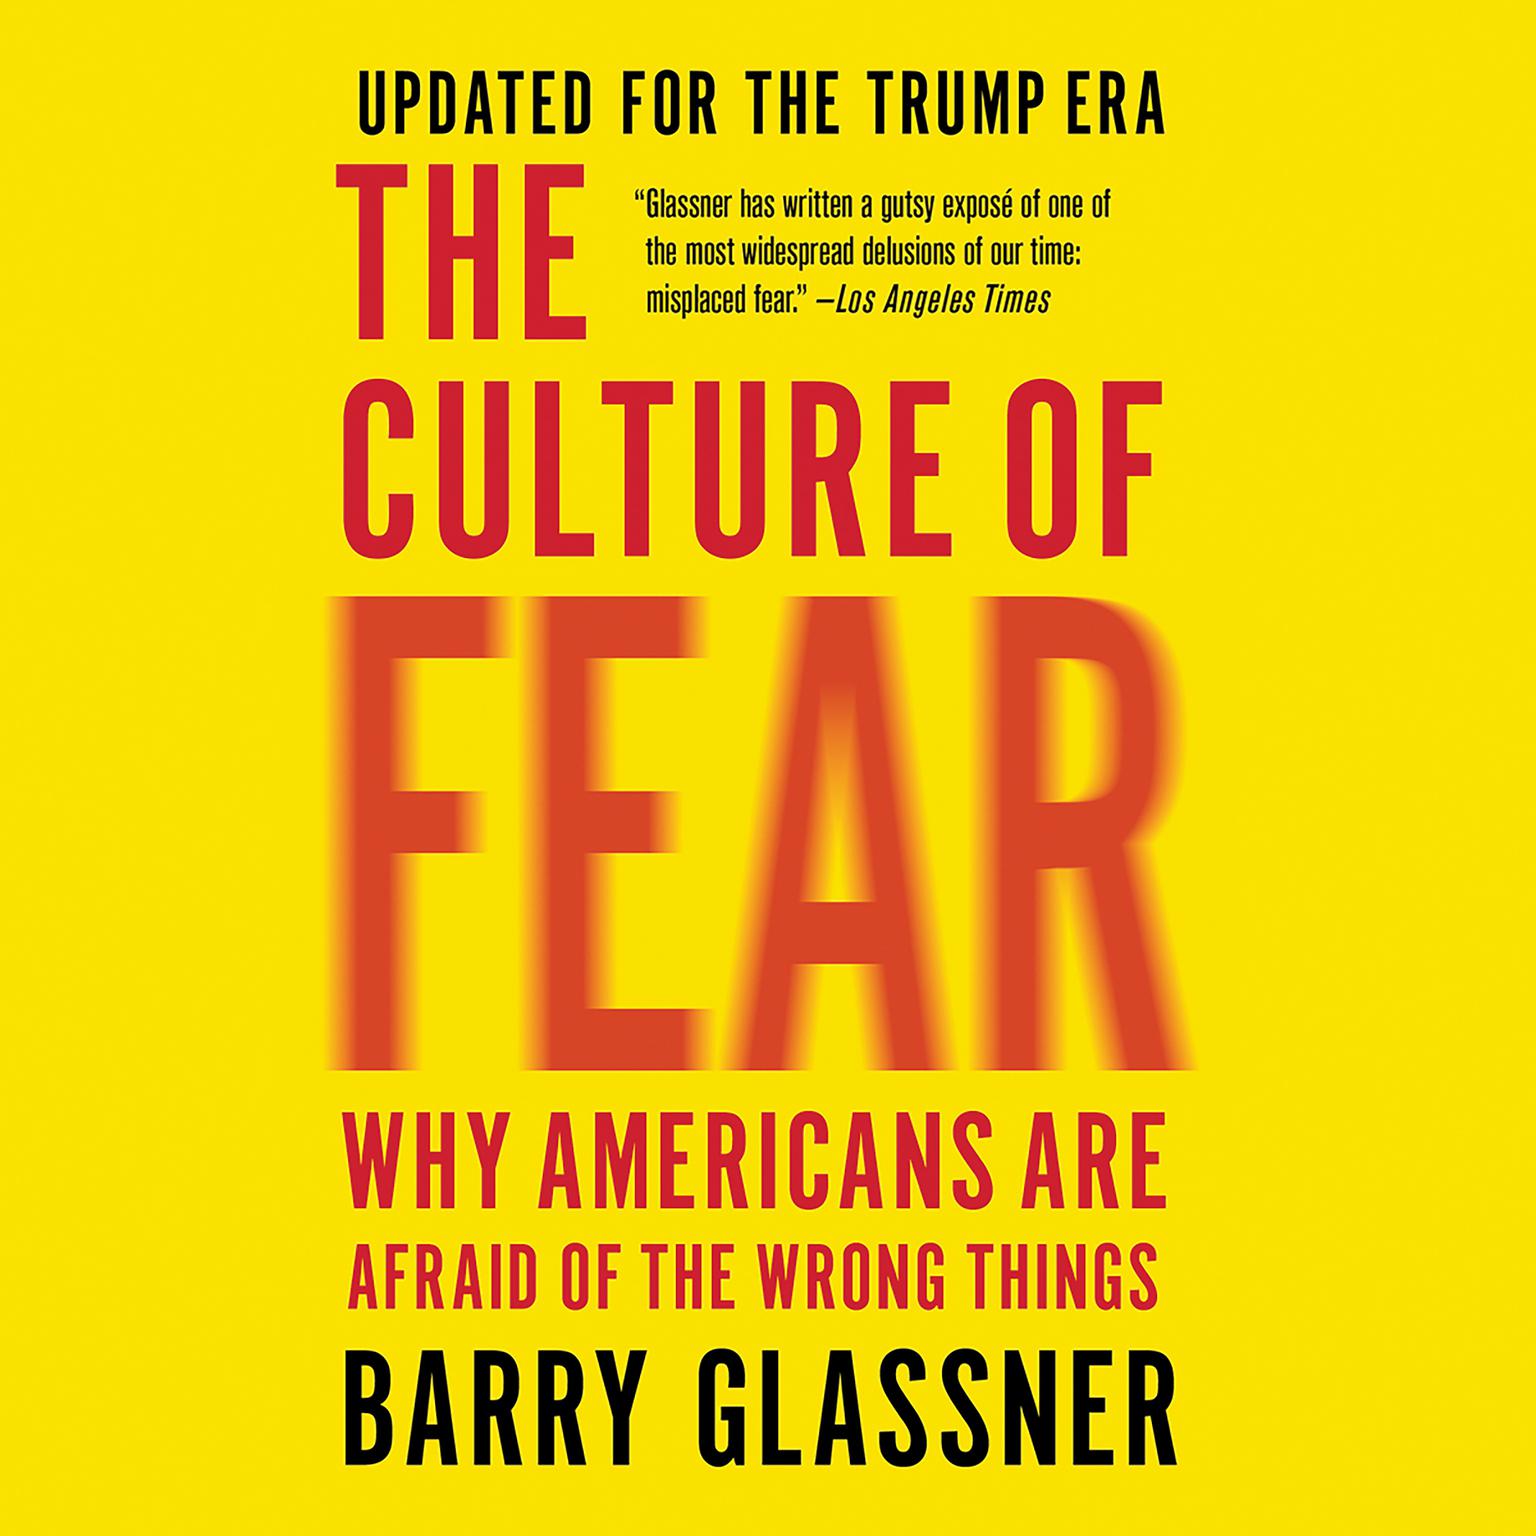 The Culture of Fear: Why Americans Are Afraid of the Wrong Things Audiobook, by Barry Glassner